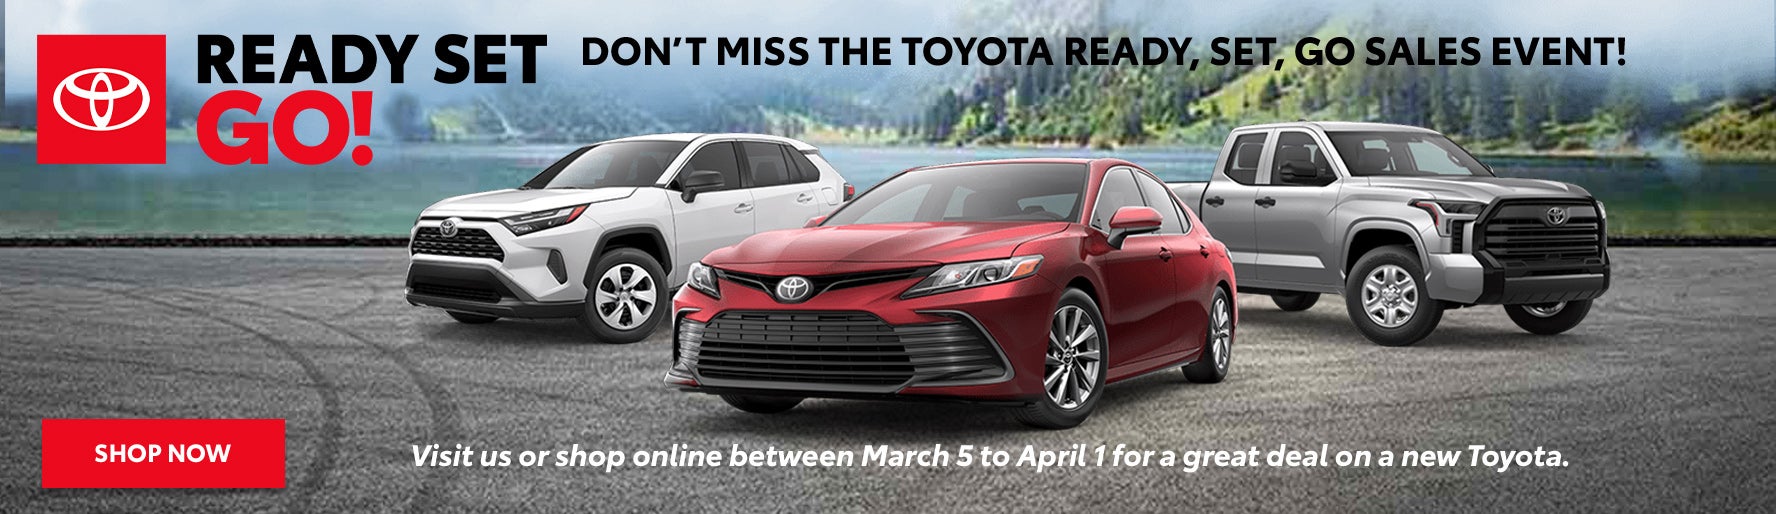 Toyota Ready Set Go Sales Event in Mobile AL